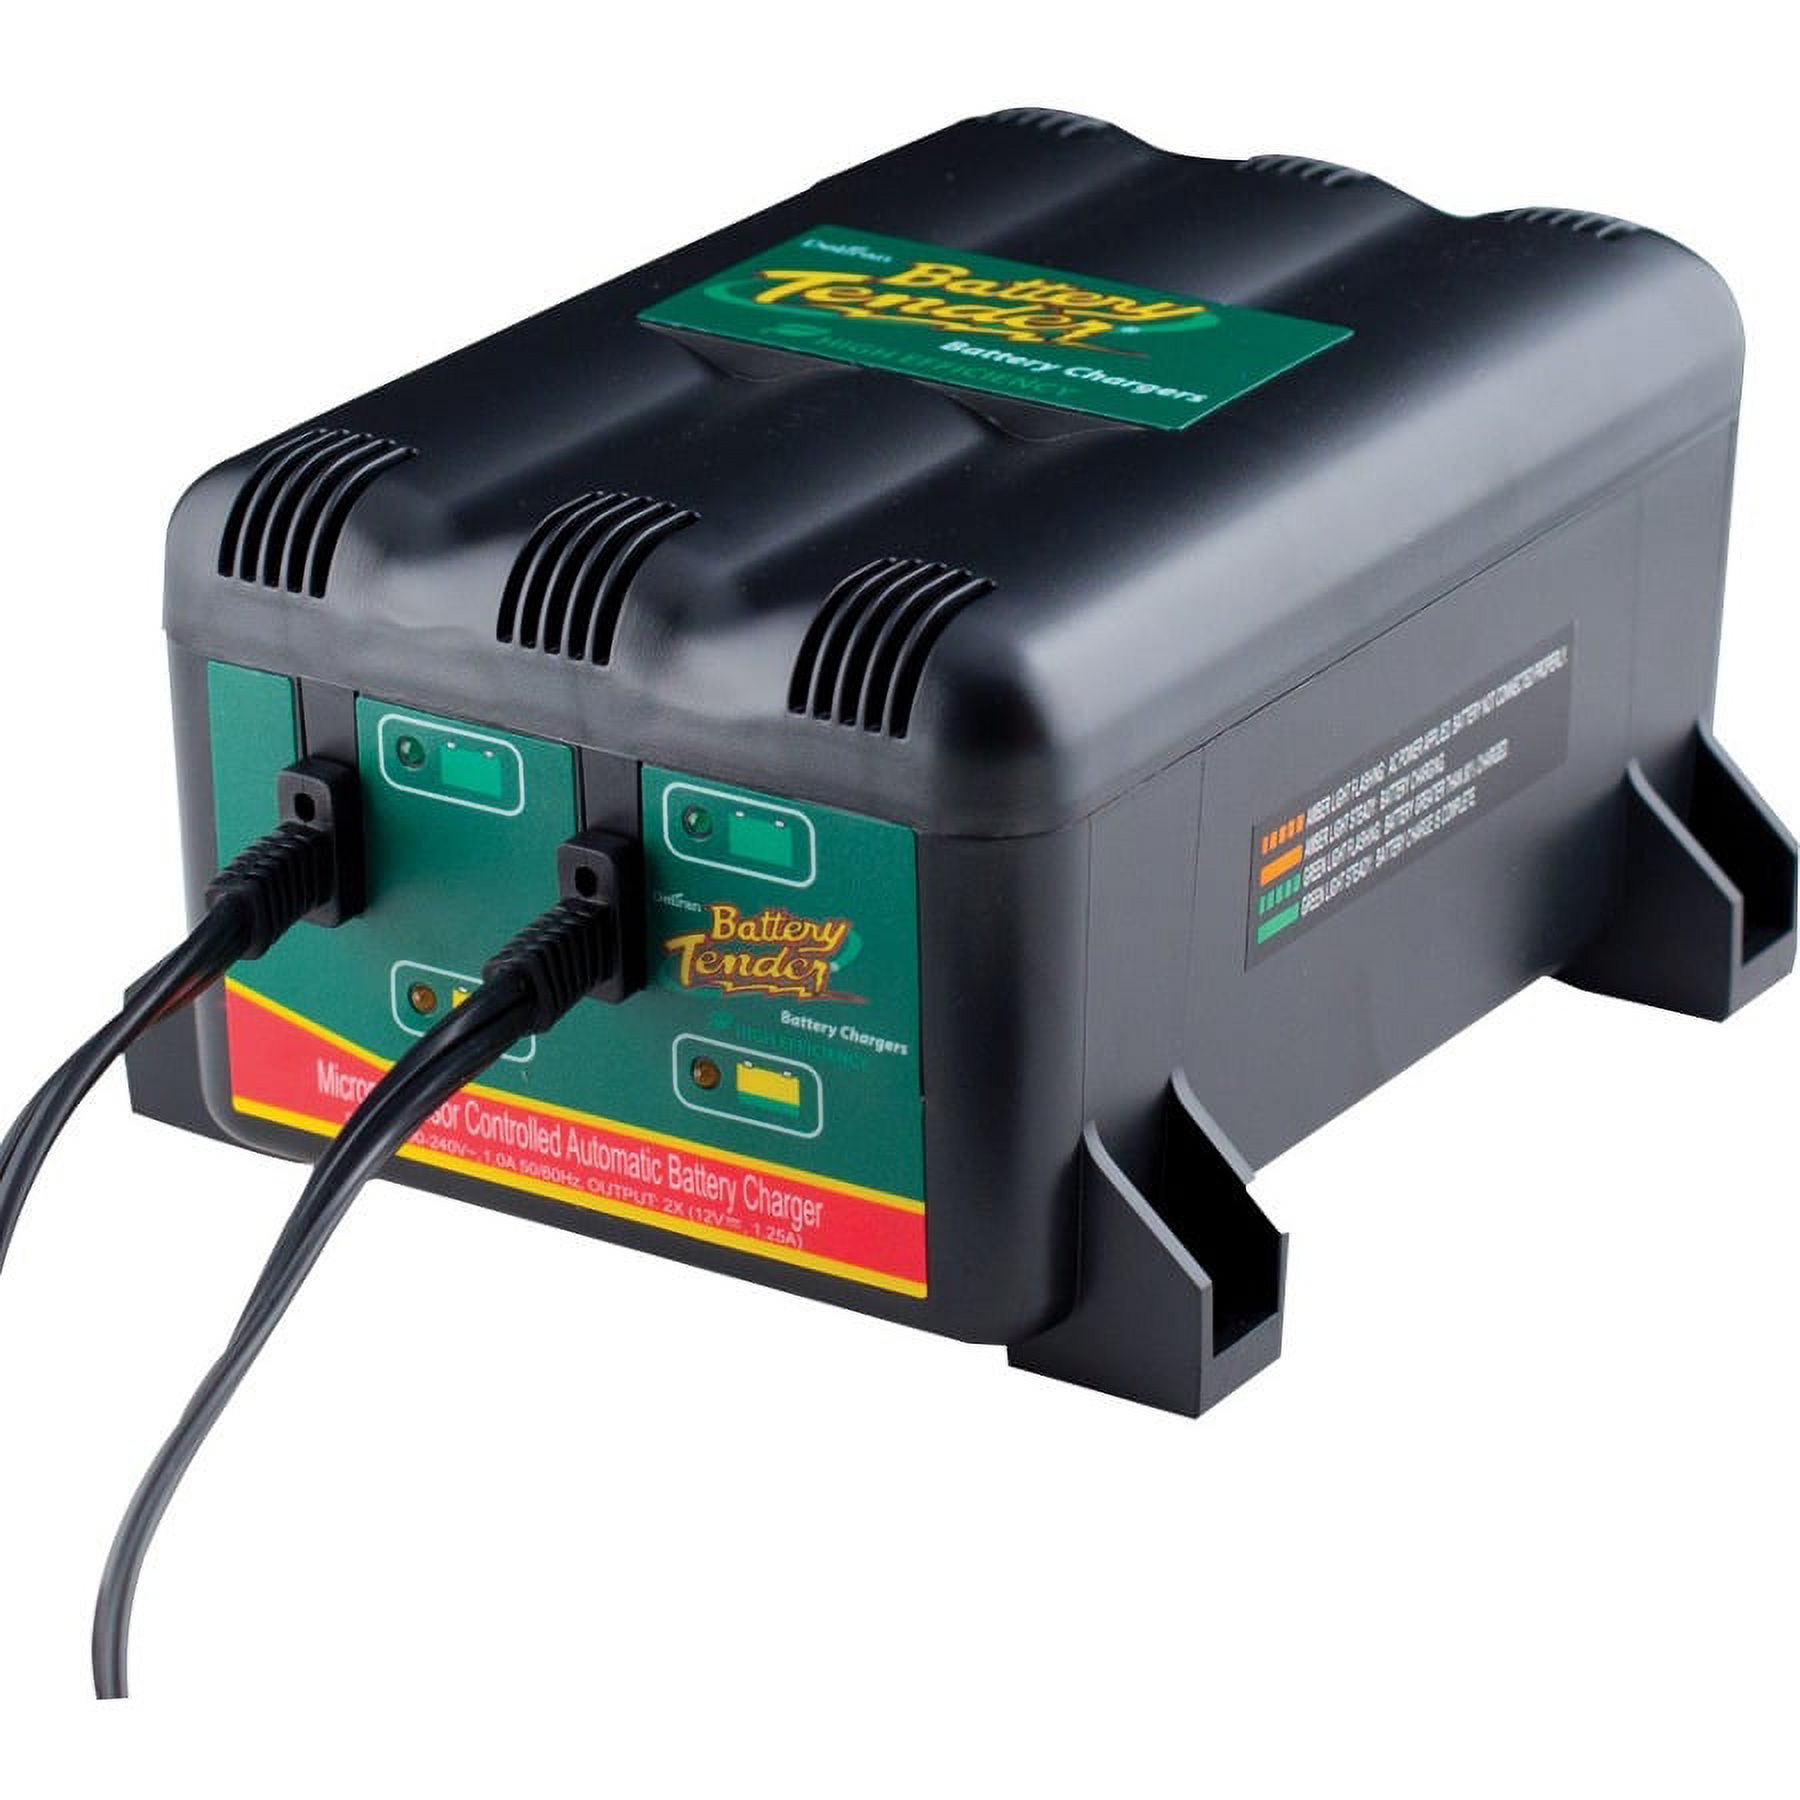 Battery Tender 2 Bank Multibank Charger - 2.5 AMP (1.25 AMPs Per Bank) - Smart 12V Multi Battery Charger and Maintainer  - 021-0165-DL-WH - image 3 of 3